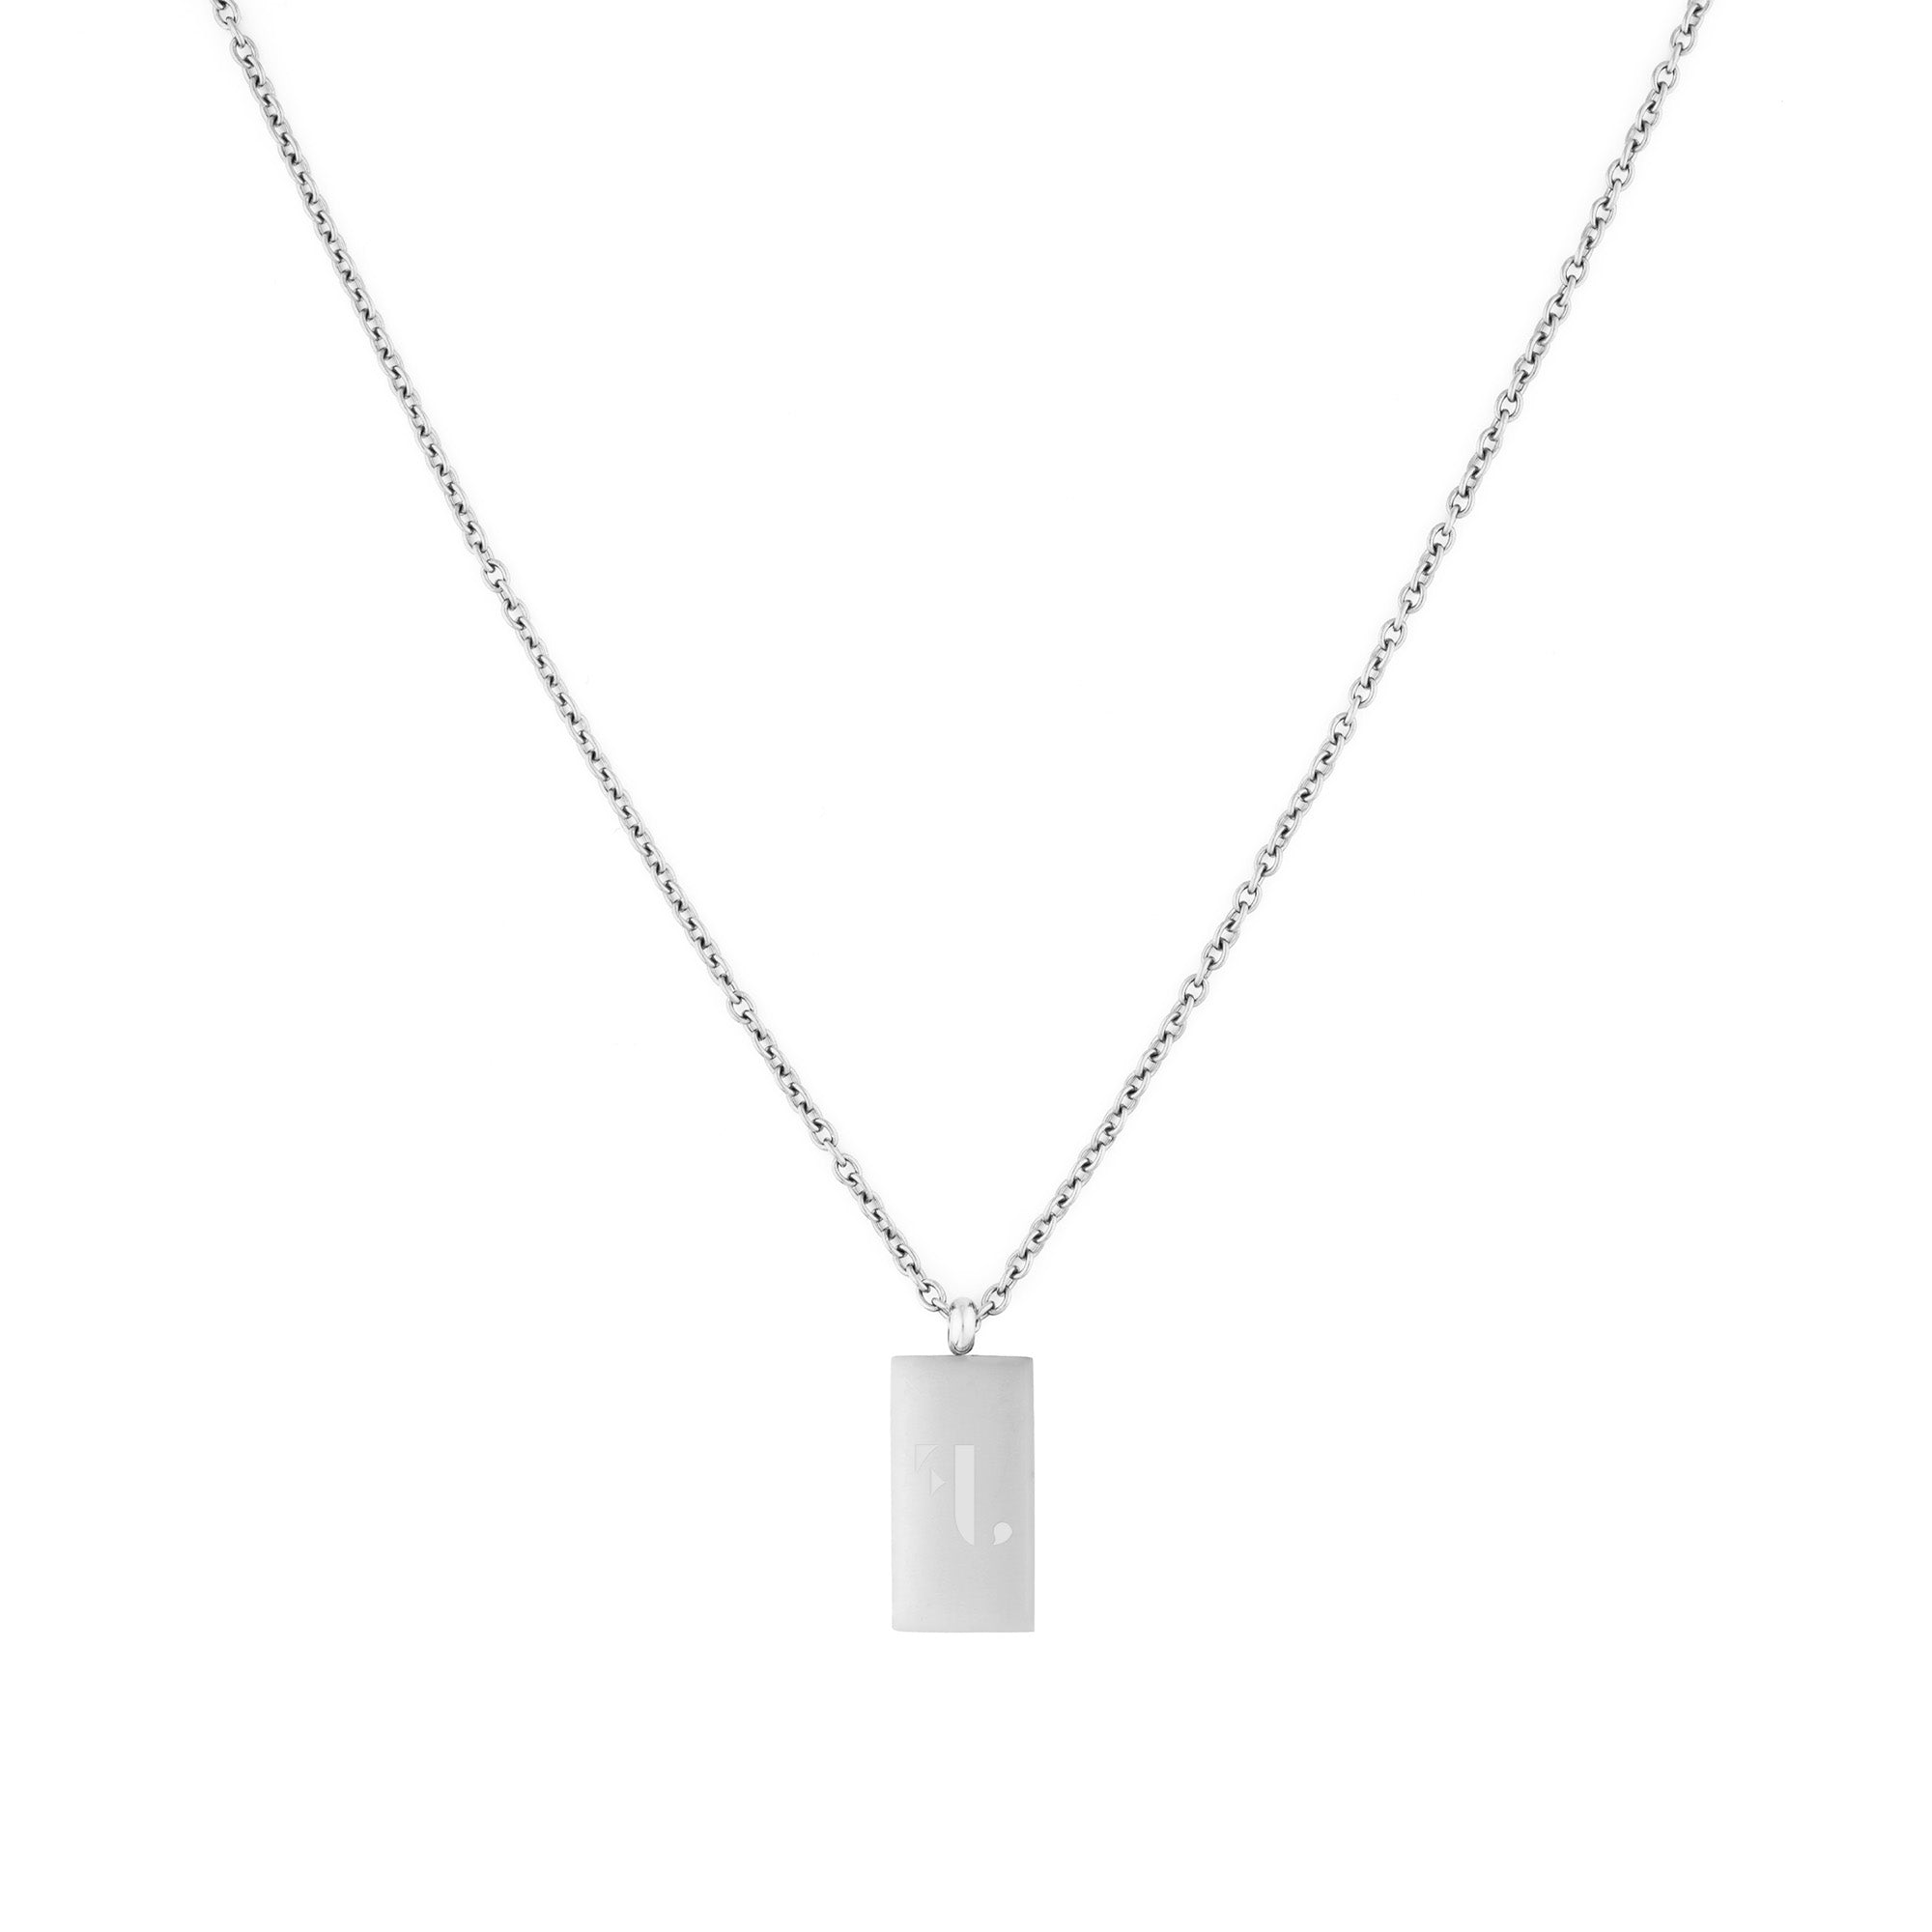 FJ Watches Five jwlry jewelry bijou jewel pendant pendentif cable forcat necklace collier acier inoxydable stainless steel rectangle square engraved gravé men homme silver argent montreal canada design water proof resistant eau chain chaine thin